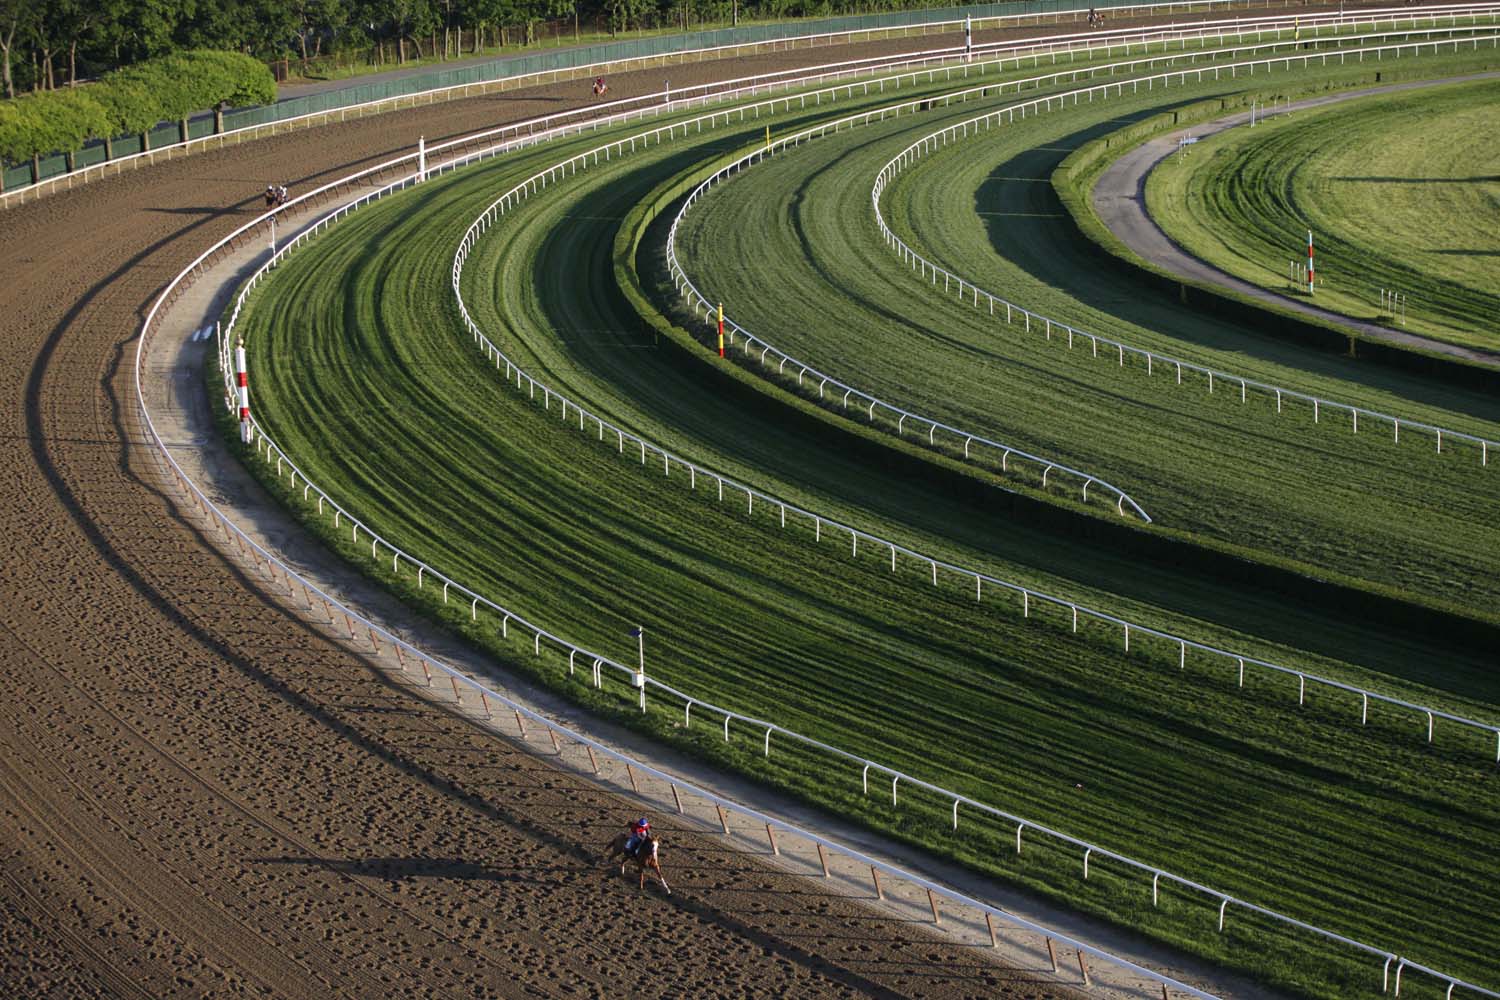 June 5, 2013. A horse gallops around the fourth turn of the 1 1/2 mile track during a morning workout at Belmont Park in Elmont, N.Y. The Belmont Stakes horse race is Saturday.